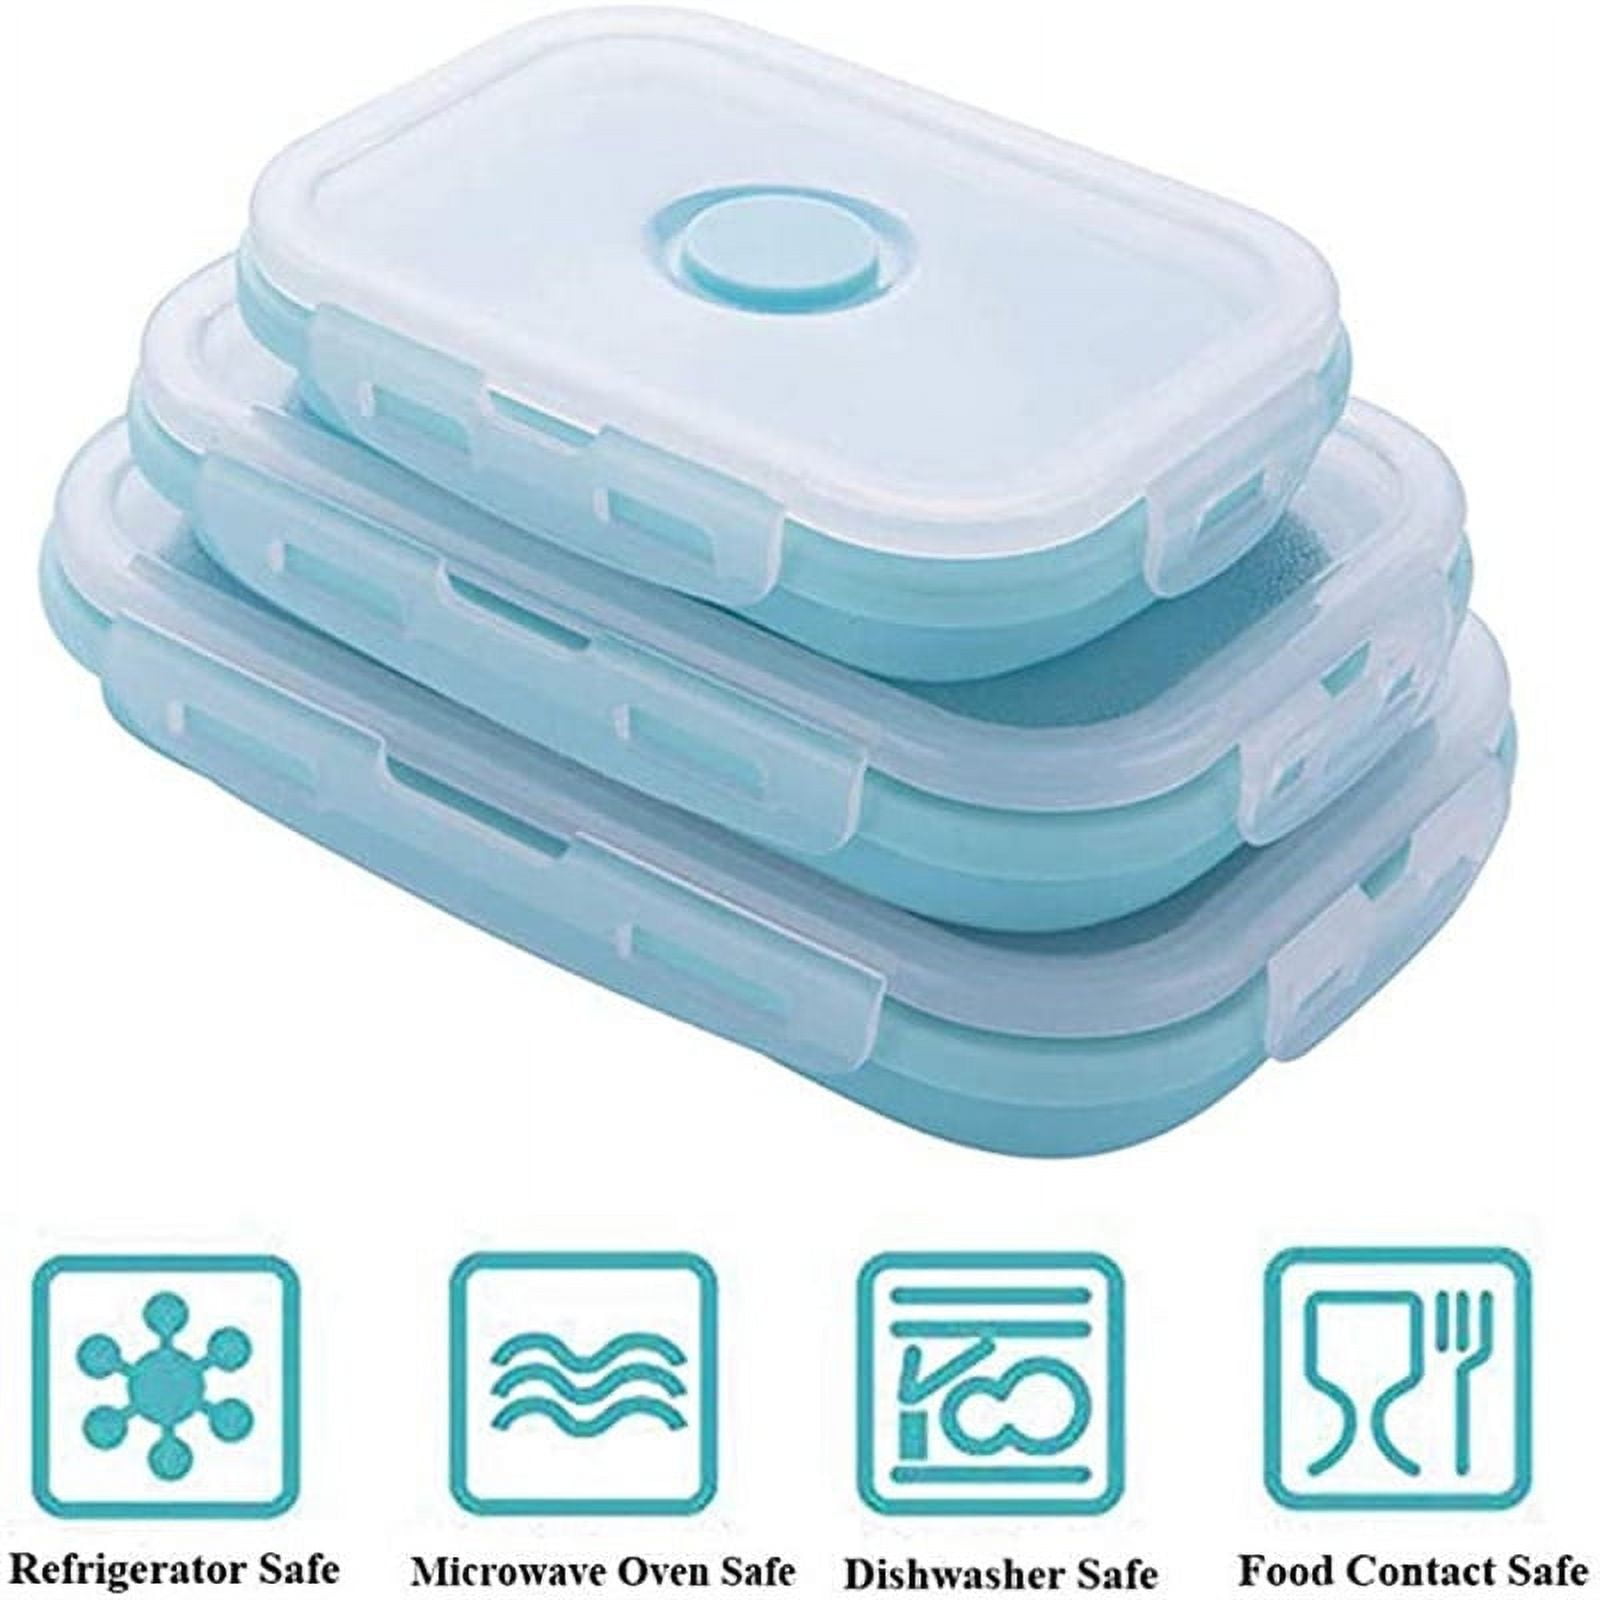 Mumufy 24 Pack Collapsible Food Containers with Lids 12oz Small Christmas  Food Storage Containers Square Silicone Collapsible Bowls with Lids for